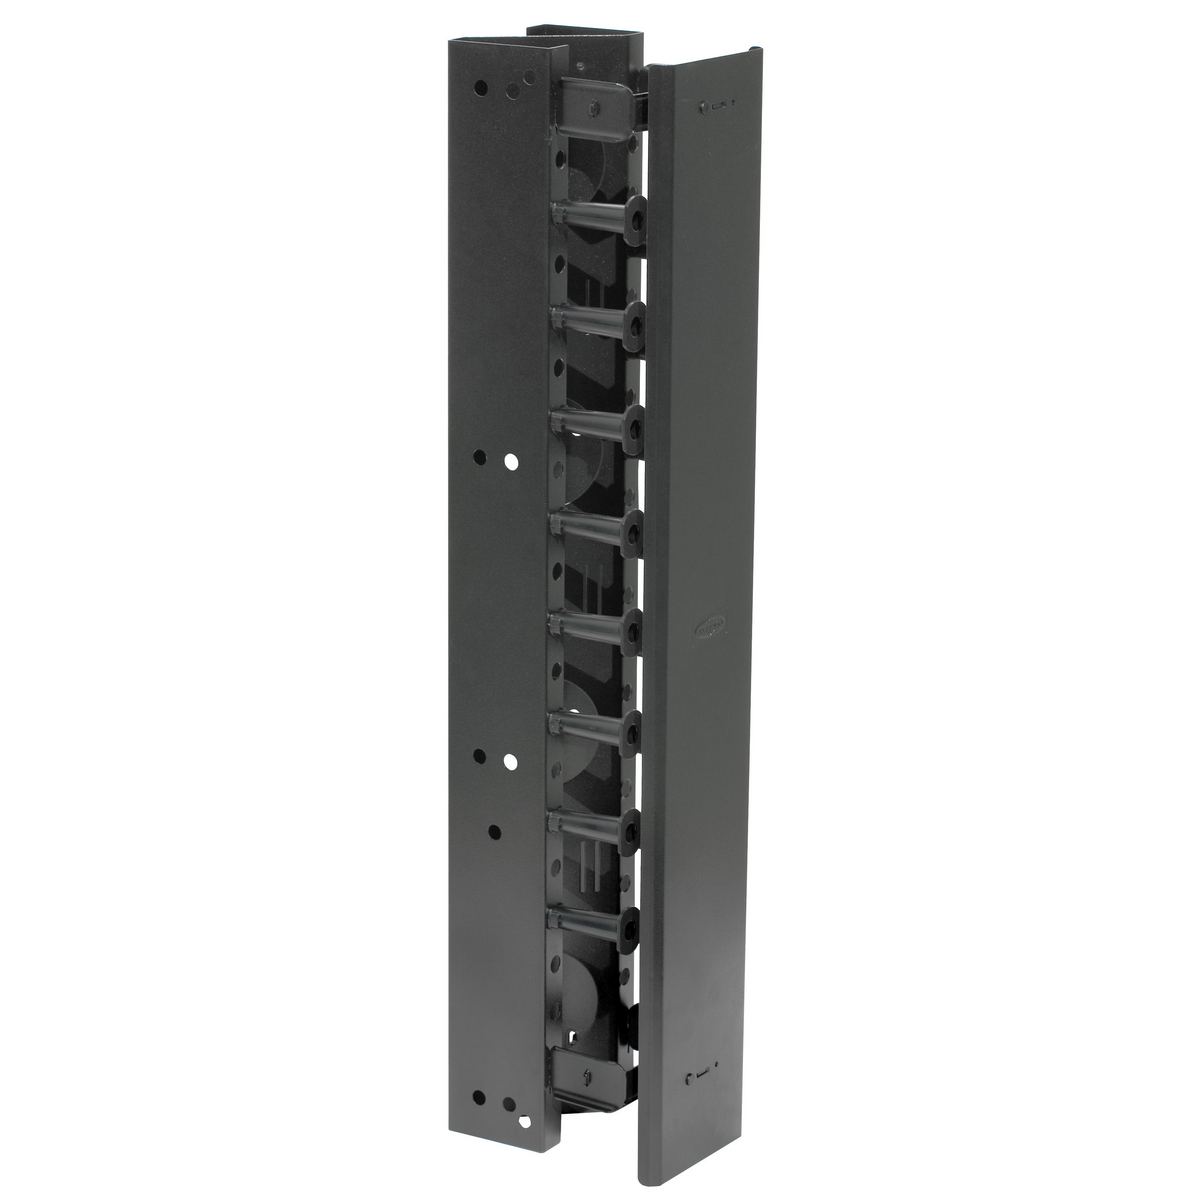 Hubbell VS76 Z Channel Vertical Cable Organizer for 7' Black Rack As-is for sale online 